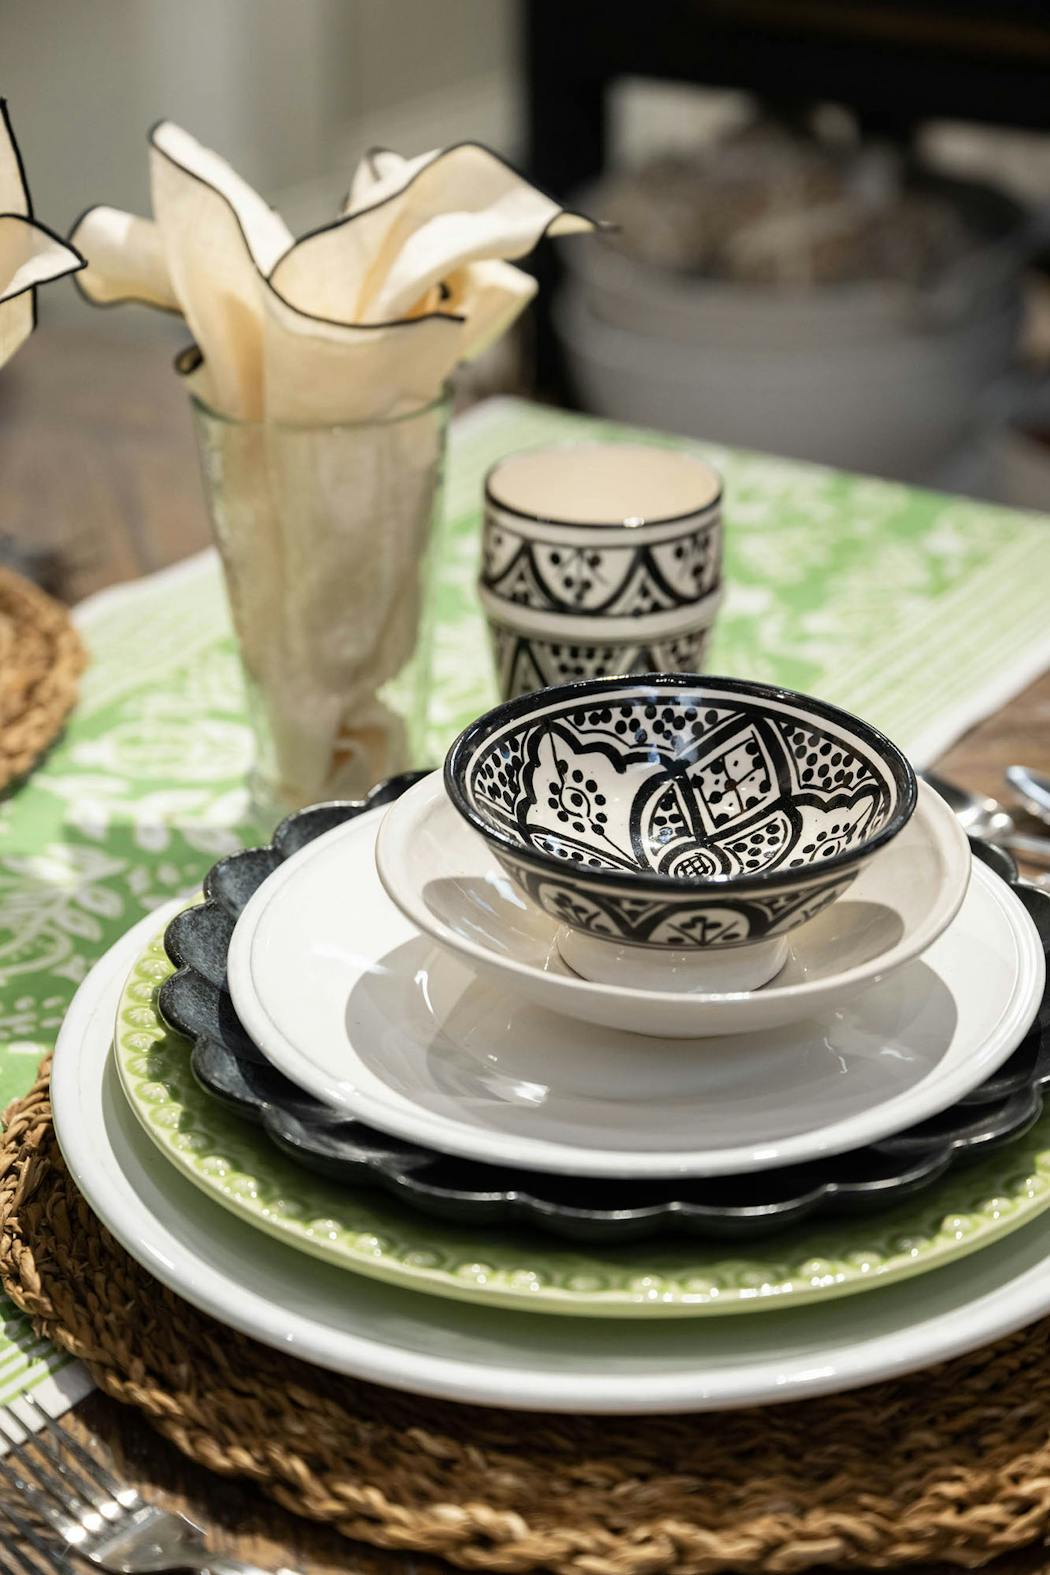 A pop of green in the dishes adds continuity to the design while white and black painted dishes add interest and texture.